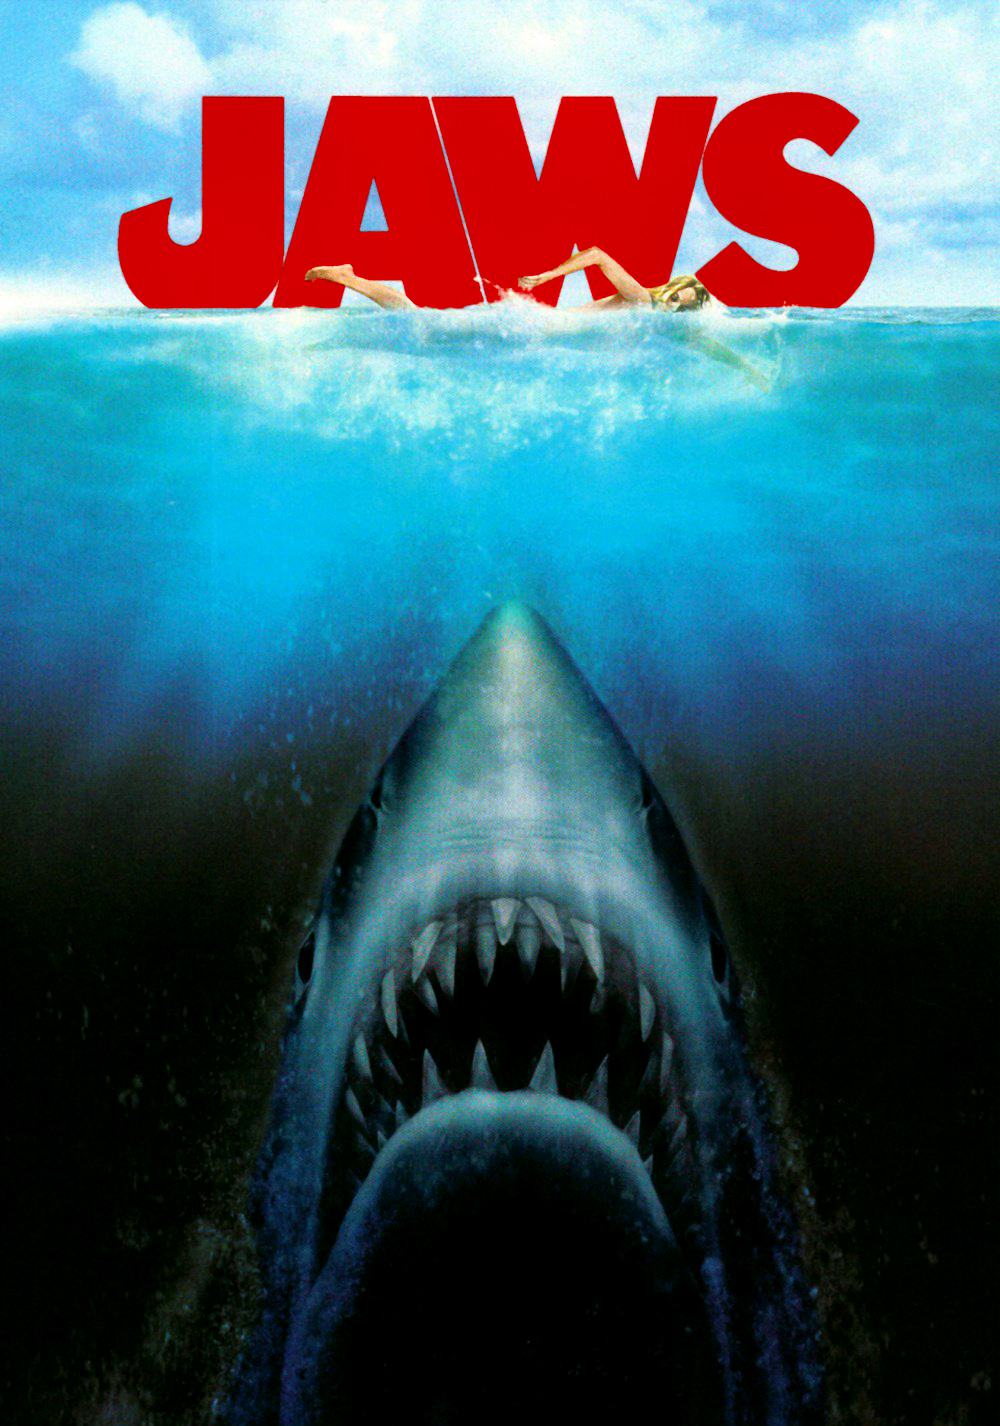 Jaws Picture - Image Abyss